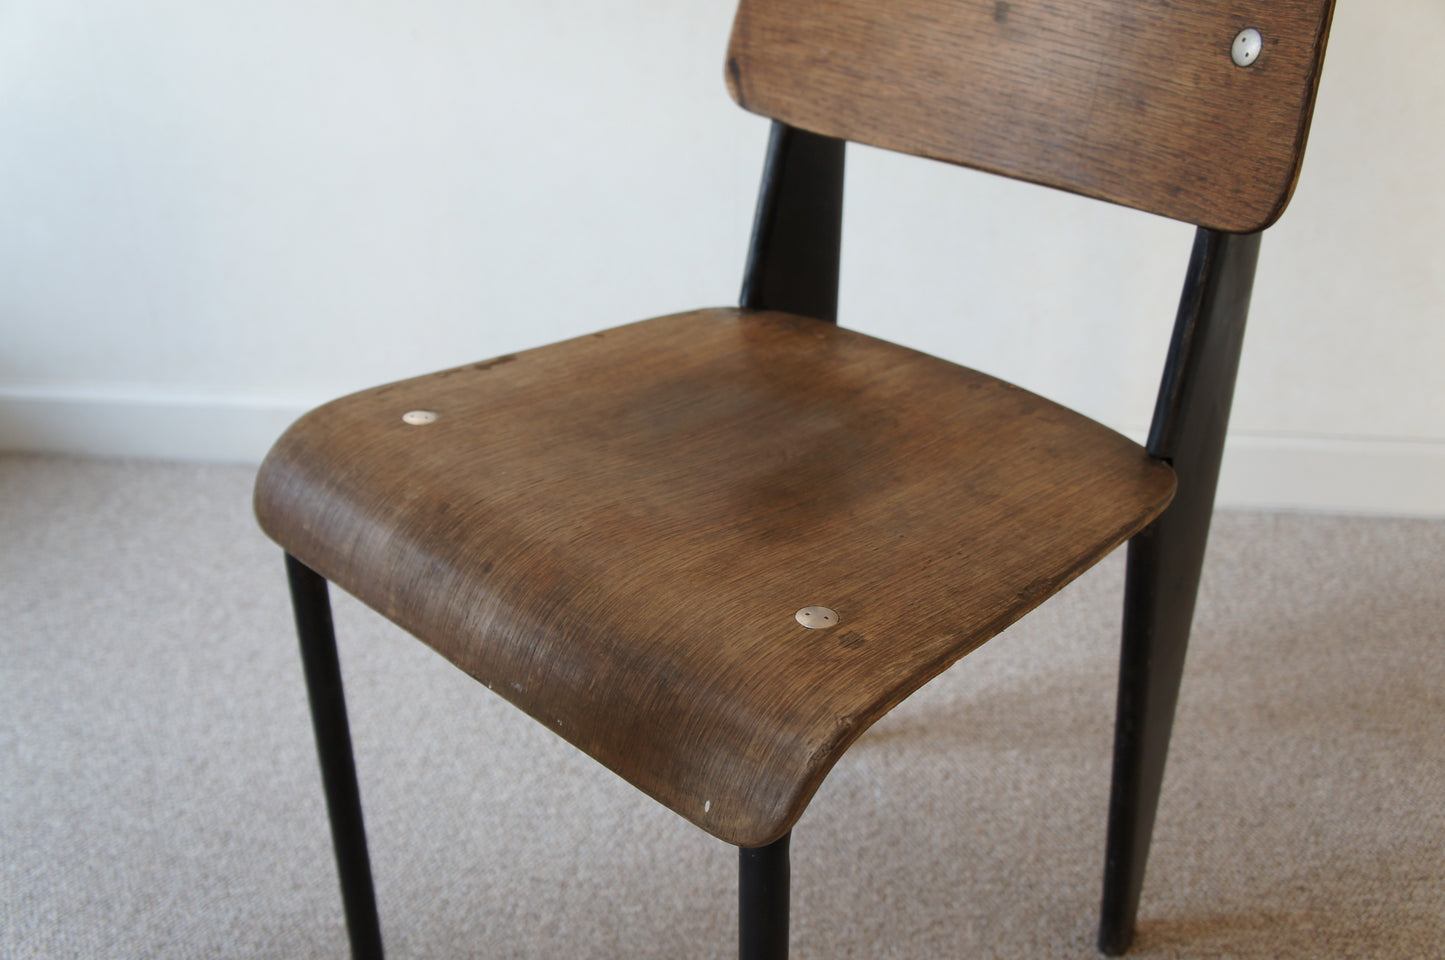 Standard Chair(Metropole305) by Jean Prouve〜Price Ask〜